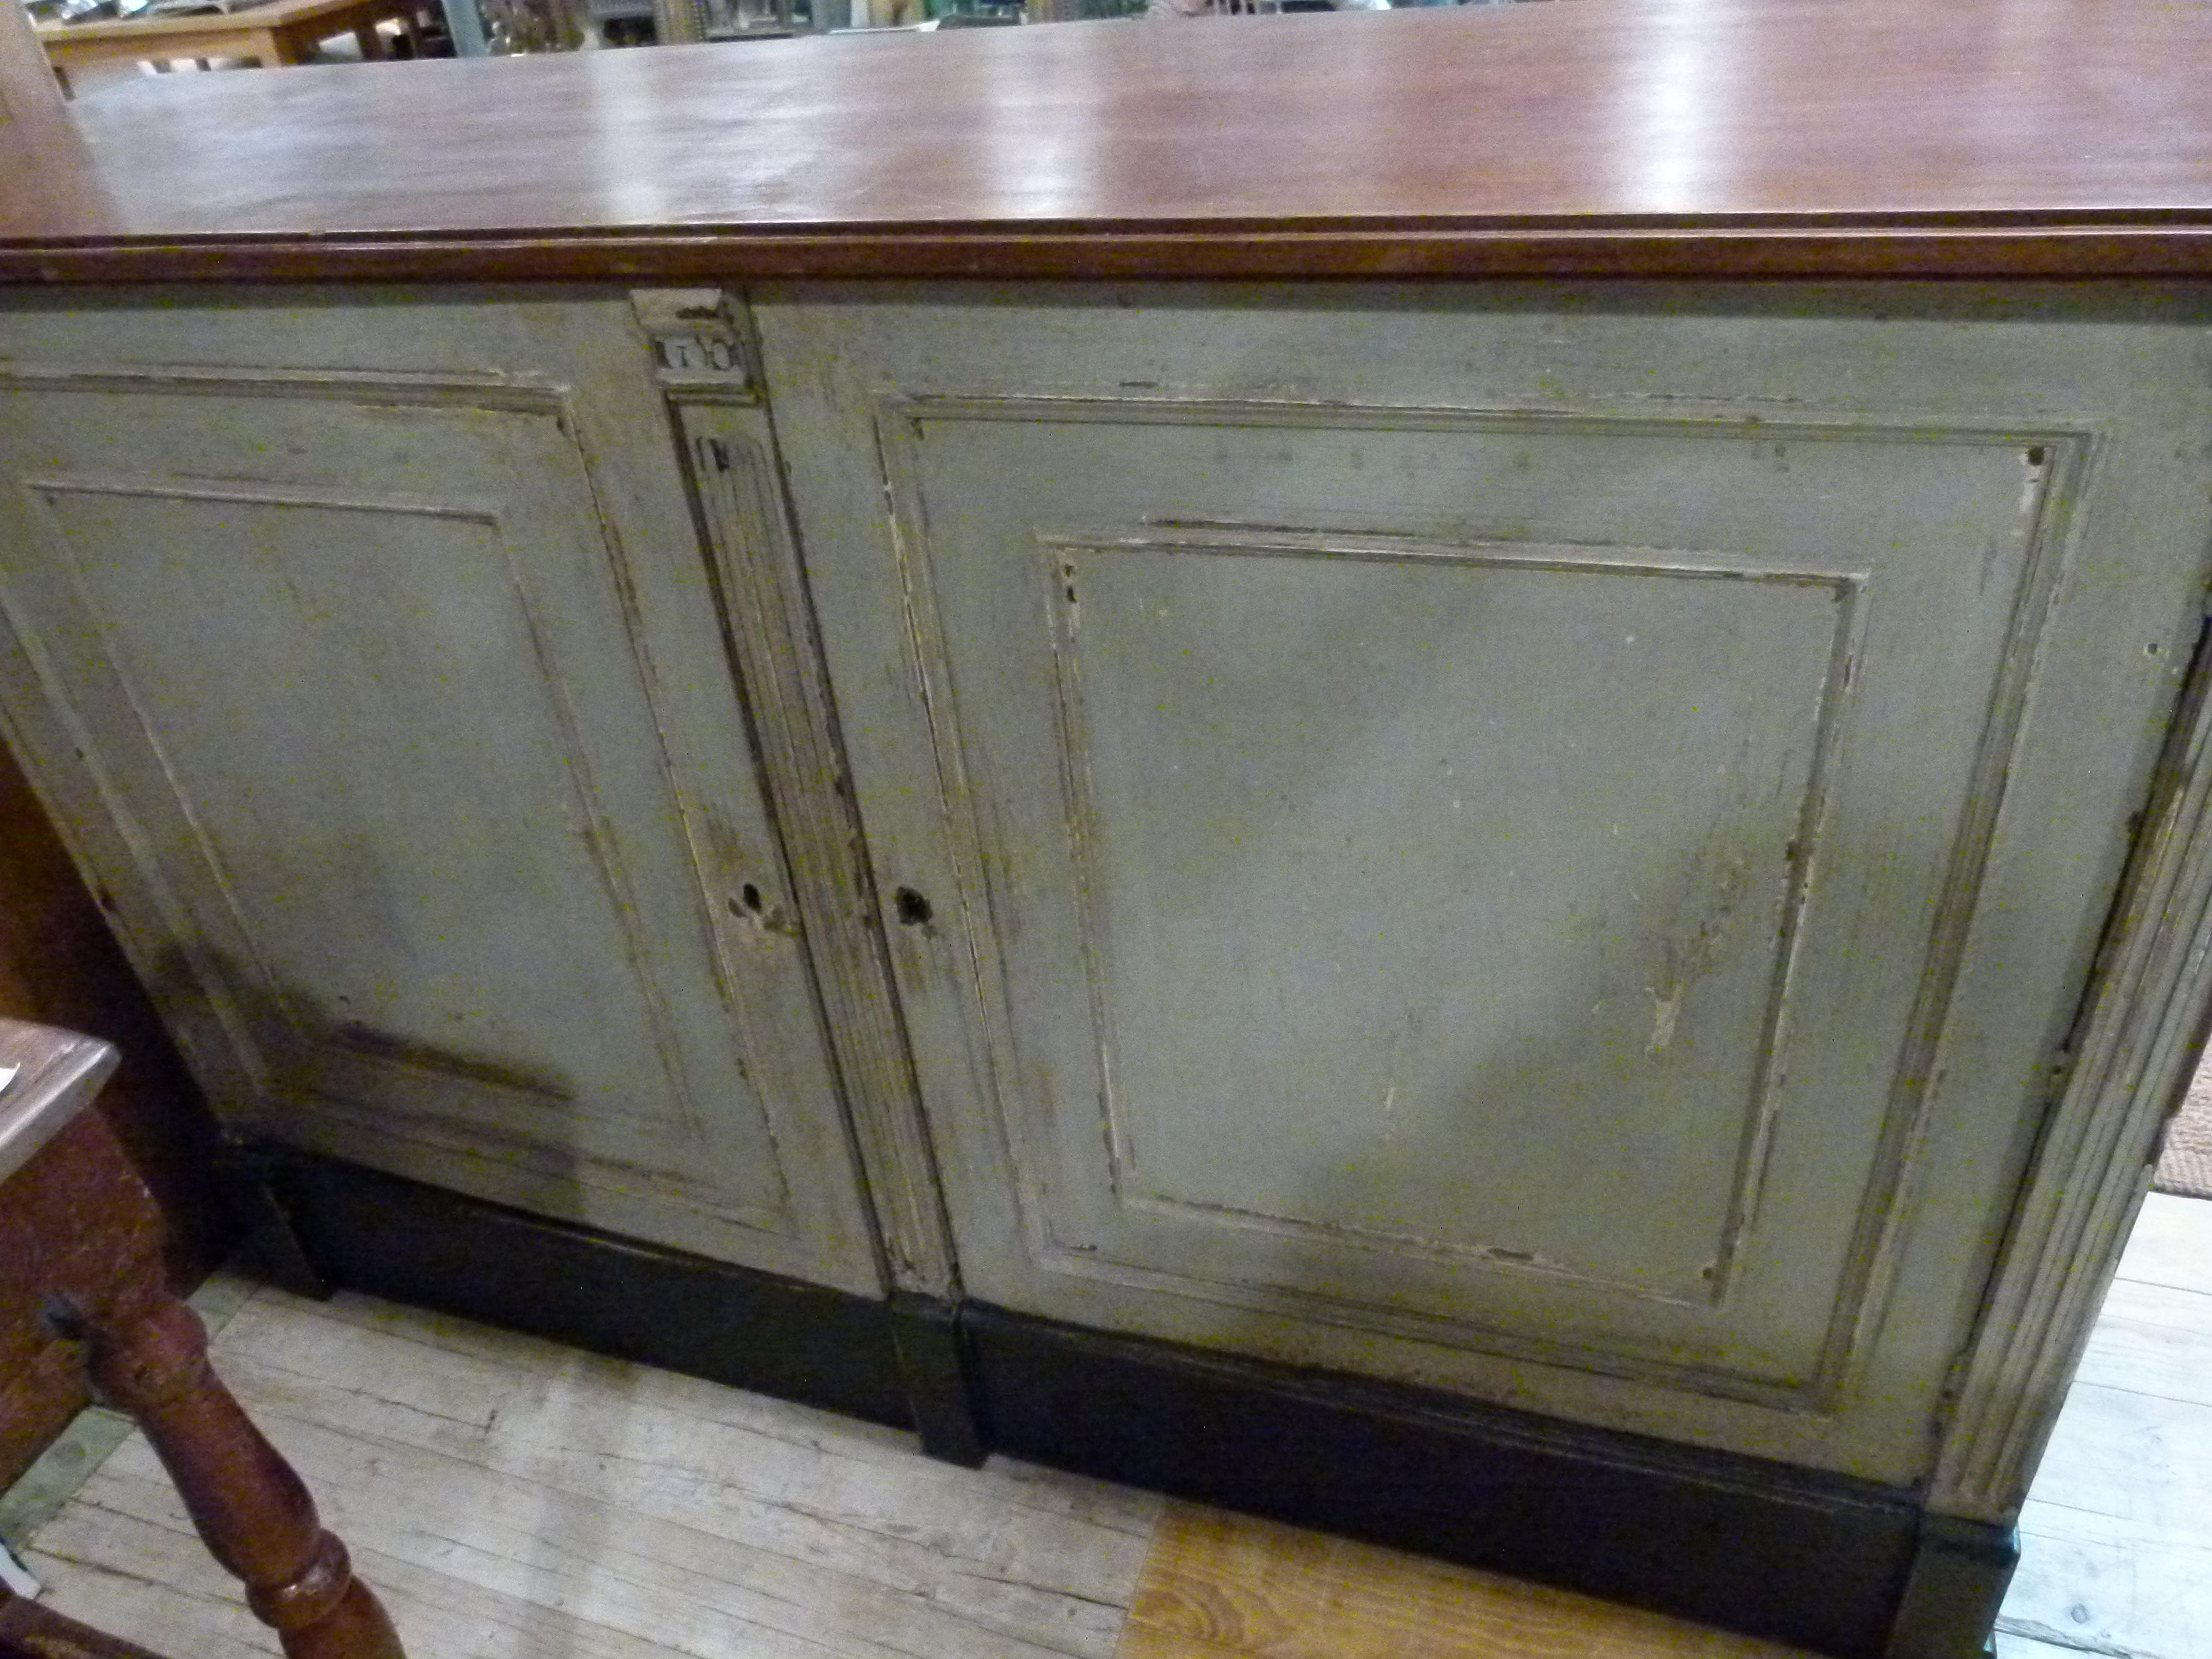 Early 20th century French wooden store counter. Painted in white except the countertop which remainds with its original wood.   Base painted in black. 
Two doors on the interior side open a cupboard with 2 shelves.
 